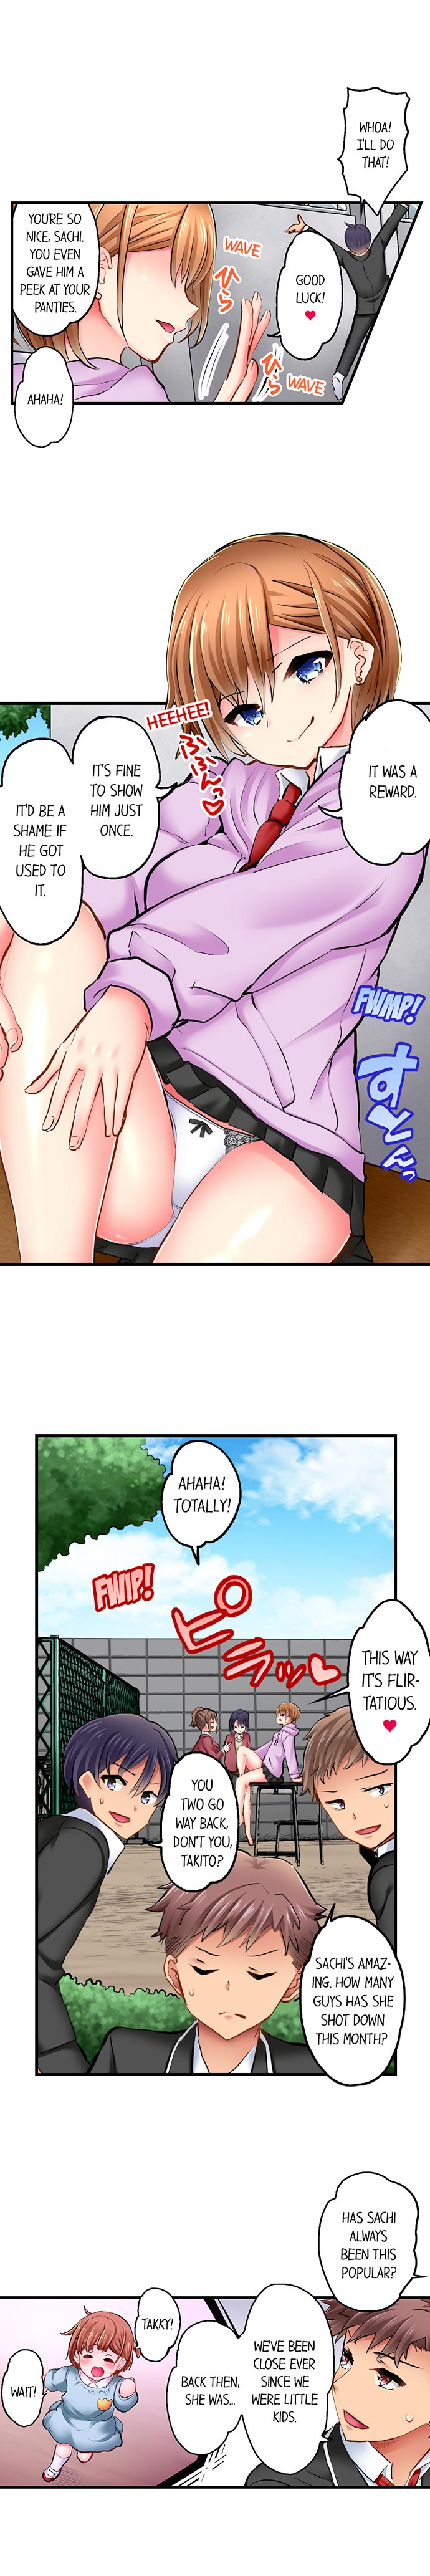 Sex in the Adult Toys Section - Chapter 1 Page 3